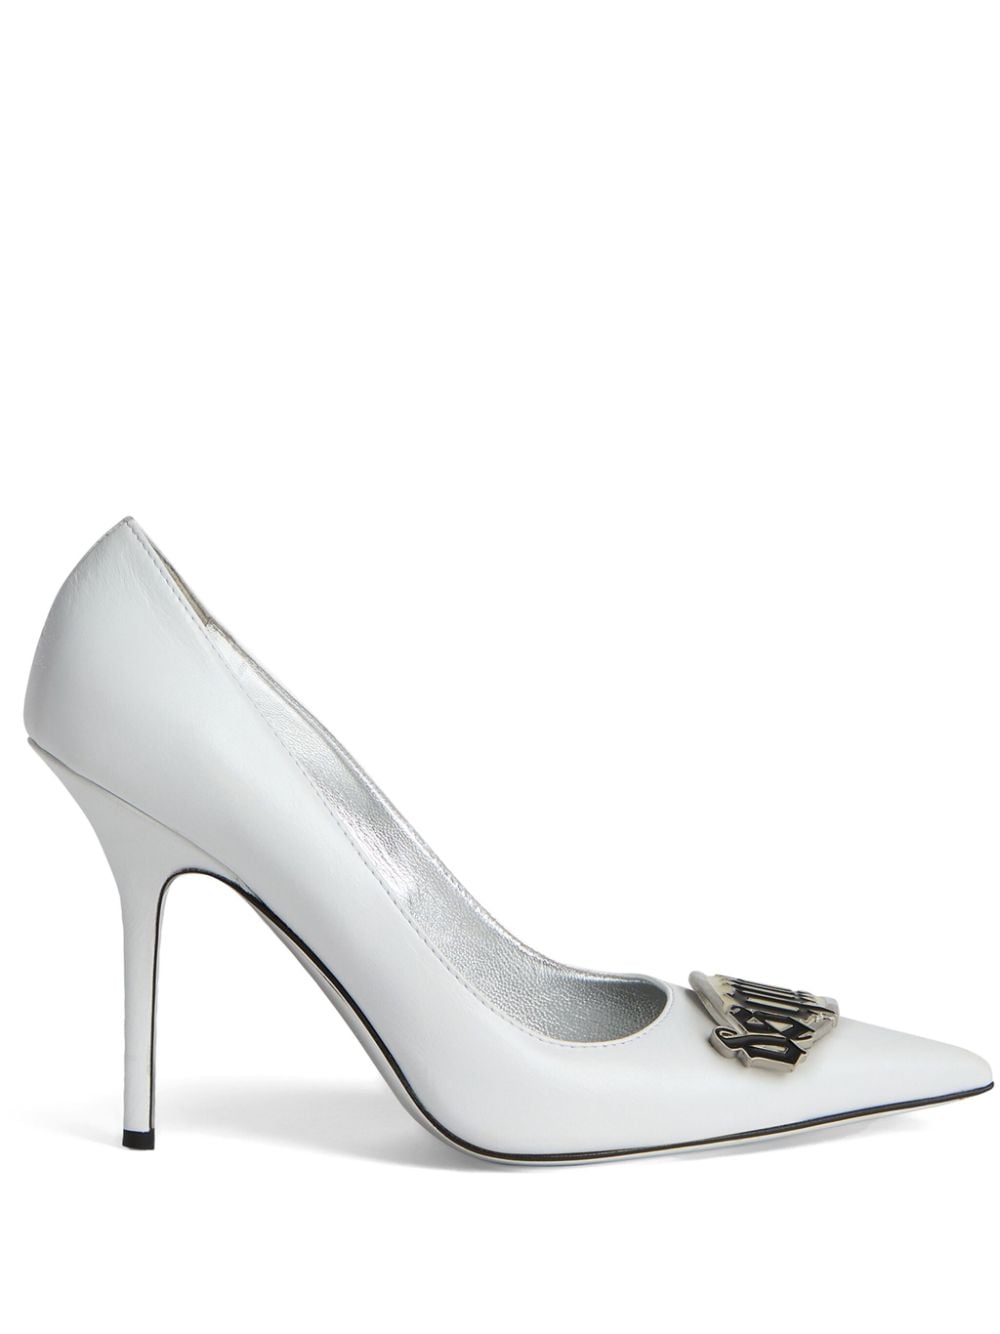 Dsquared2 Pumps in pelle - Bianco